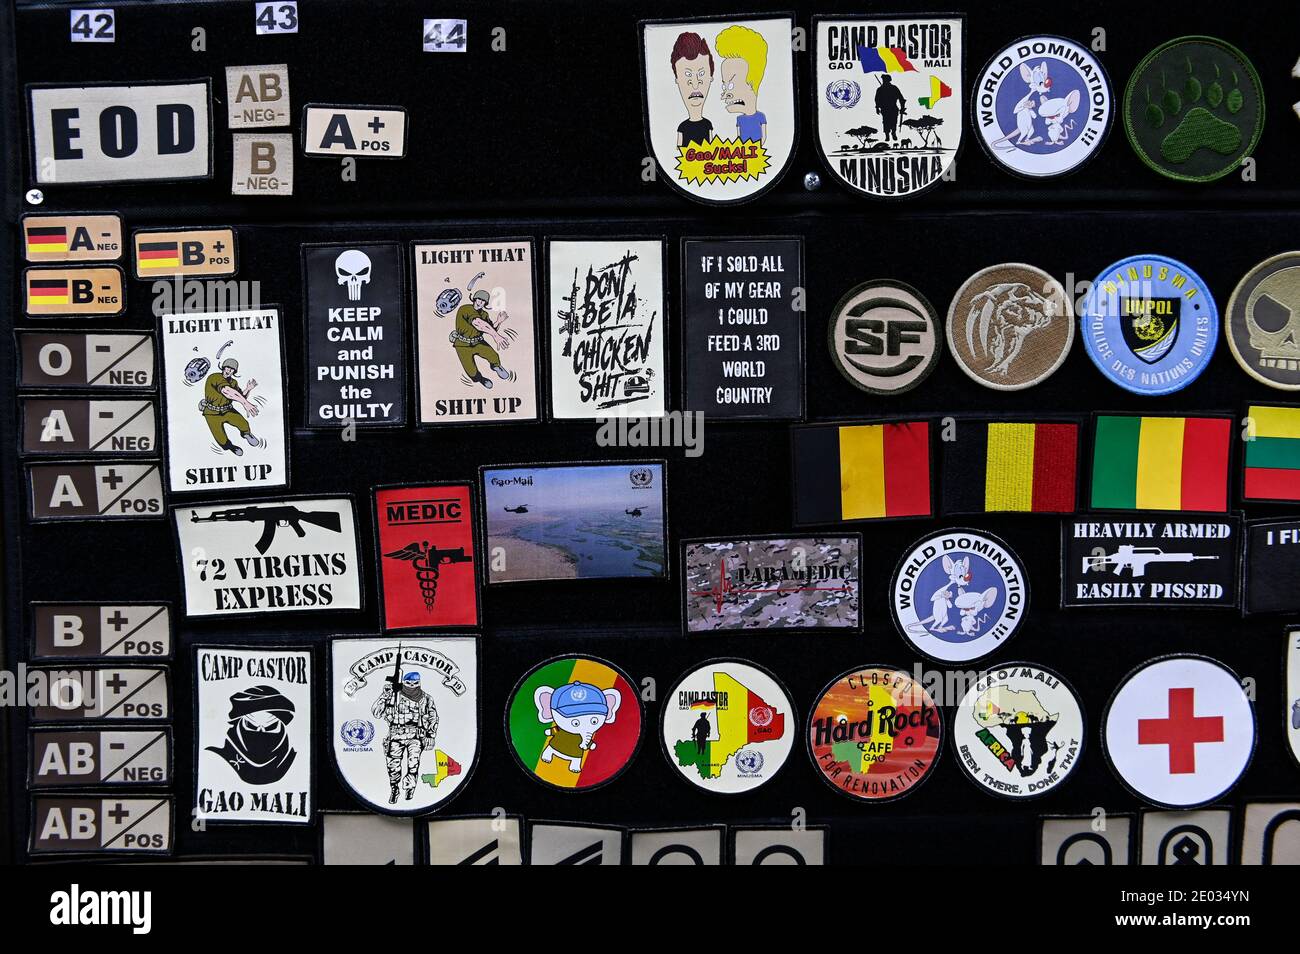 MALI, Gao, Minusma UN peace keeping mission, Camp Castor, german army Bundeswehr, DSPX military shop with sticker and blazon Stock Photo